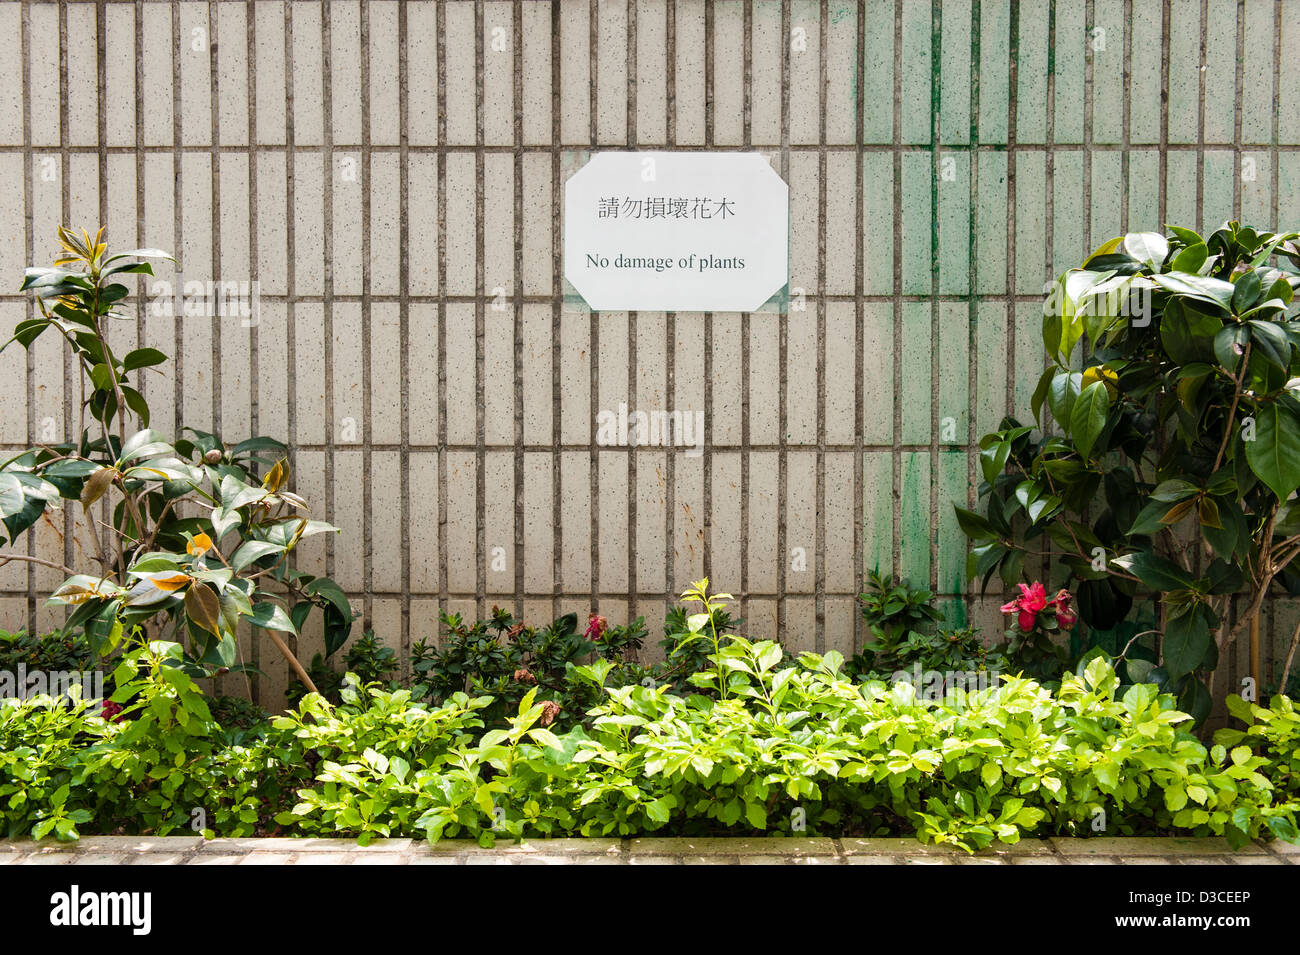 Hong Kong, March 2012 Do not damage the plants sign in an outside sitting area. Photo Kees Metselaar Stock Photo